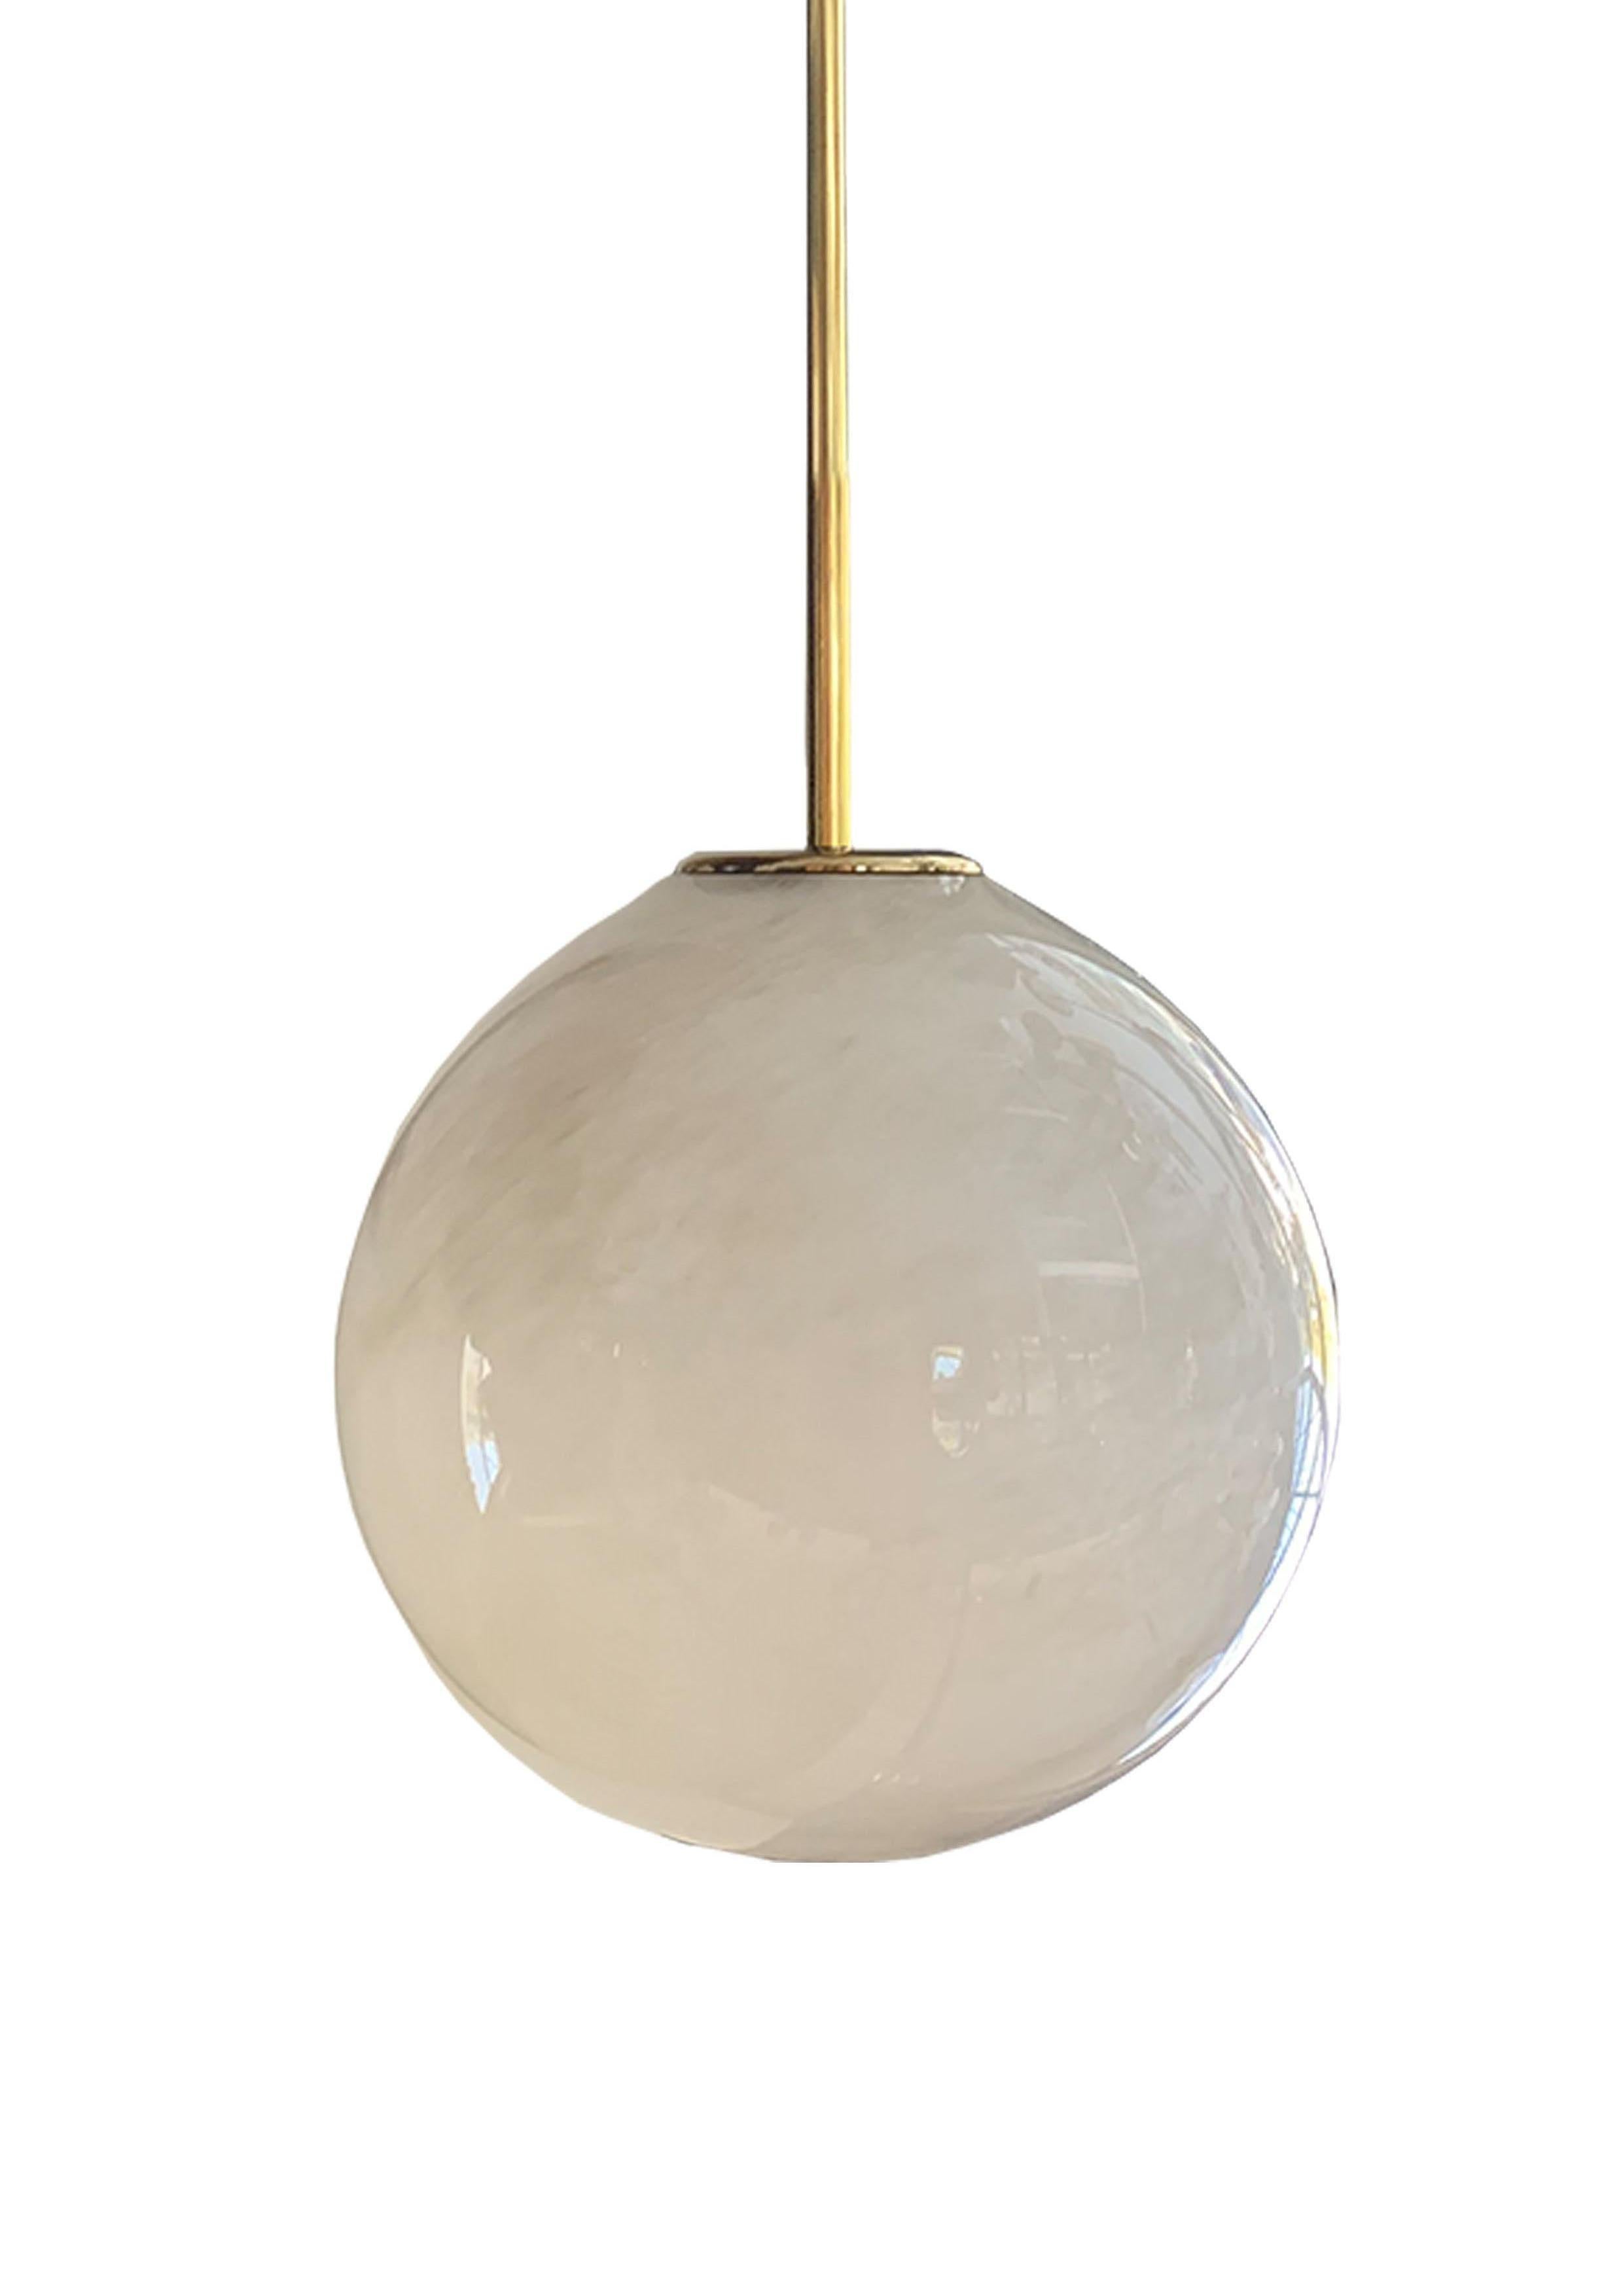 akm collection - pendant lamp by Sema Topaloglu

This product is hand-crafted therefore each production is unique and might not be exactly the same as visual.

Sema Topaloglu Studio is known for the original designs of interiors, sculptures and